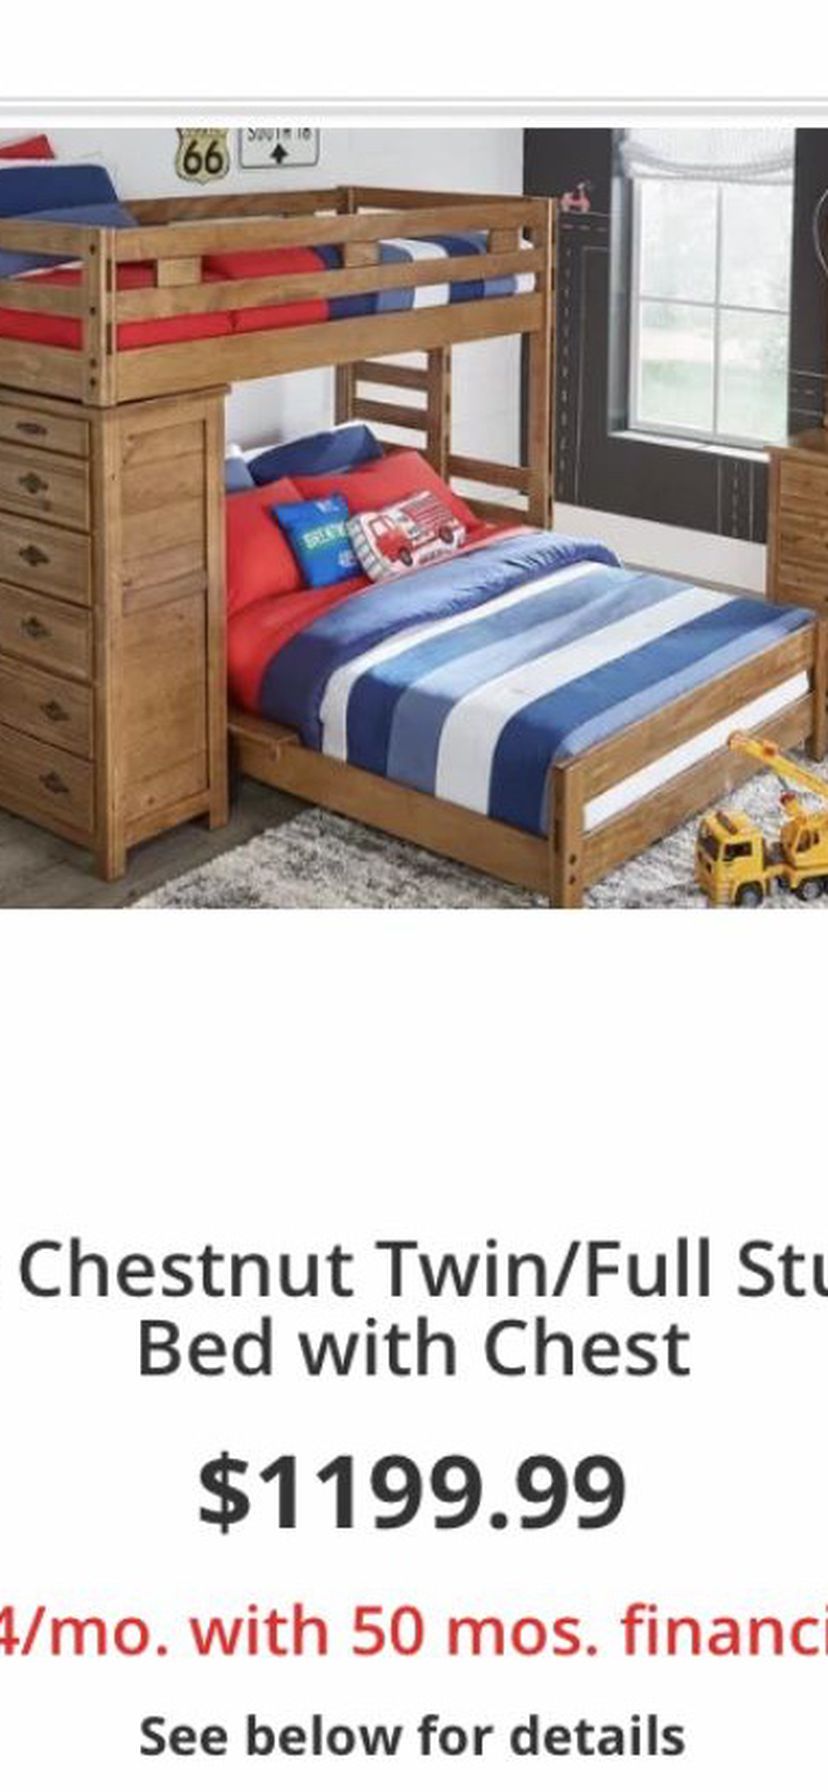 Double Chestnut Kids Bunk Bed Twin/Full With Chest Top Mattress Only